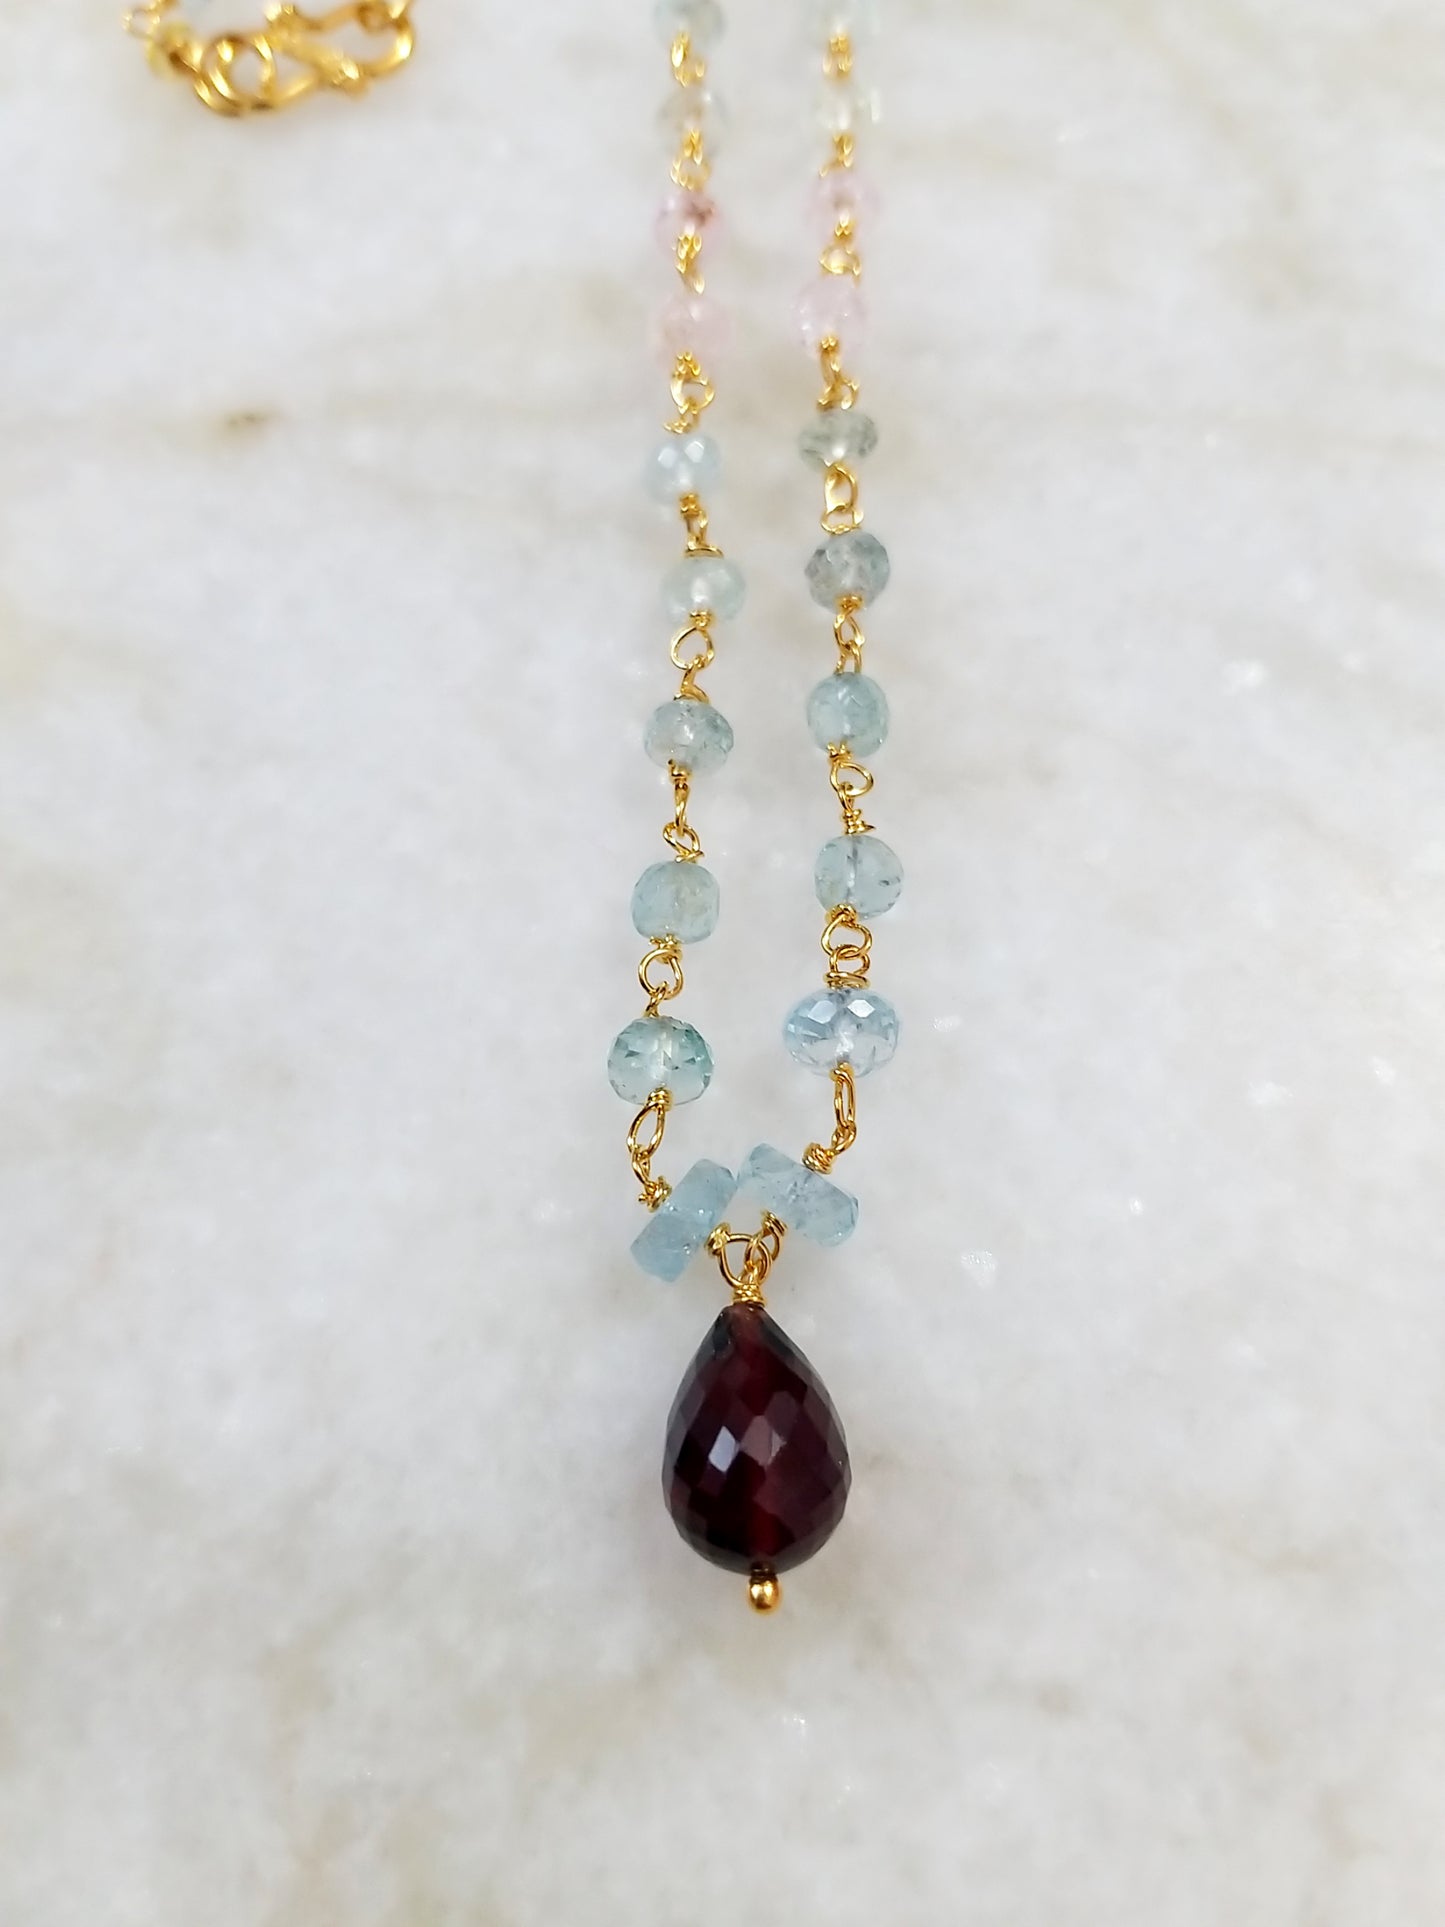 Natural Multi Aquamarine Beads and Garnet Necklace, Birthstone Necklace